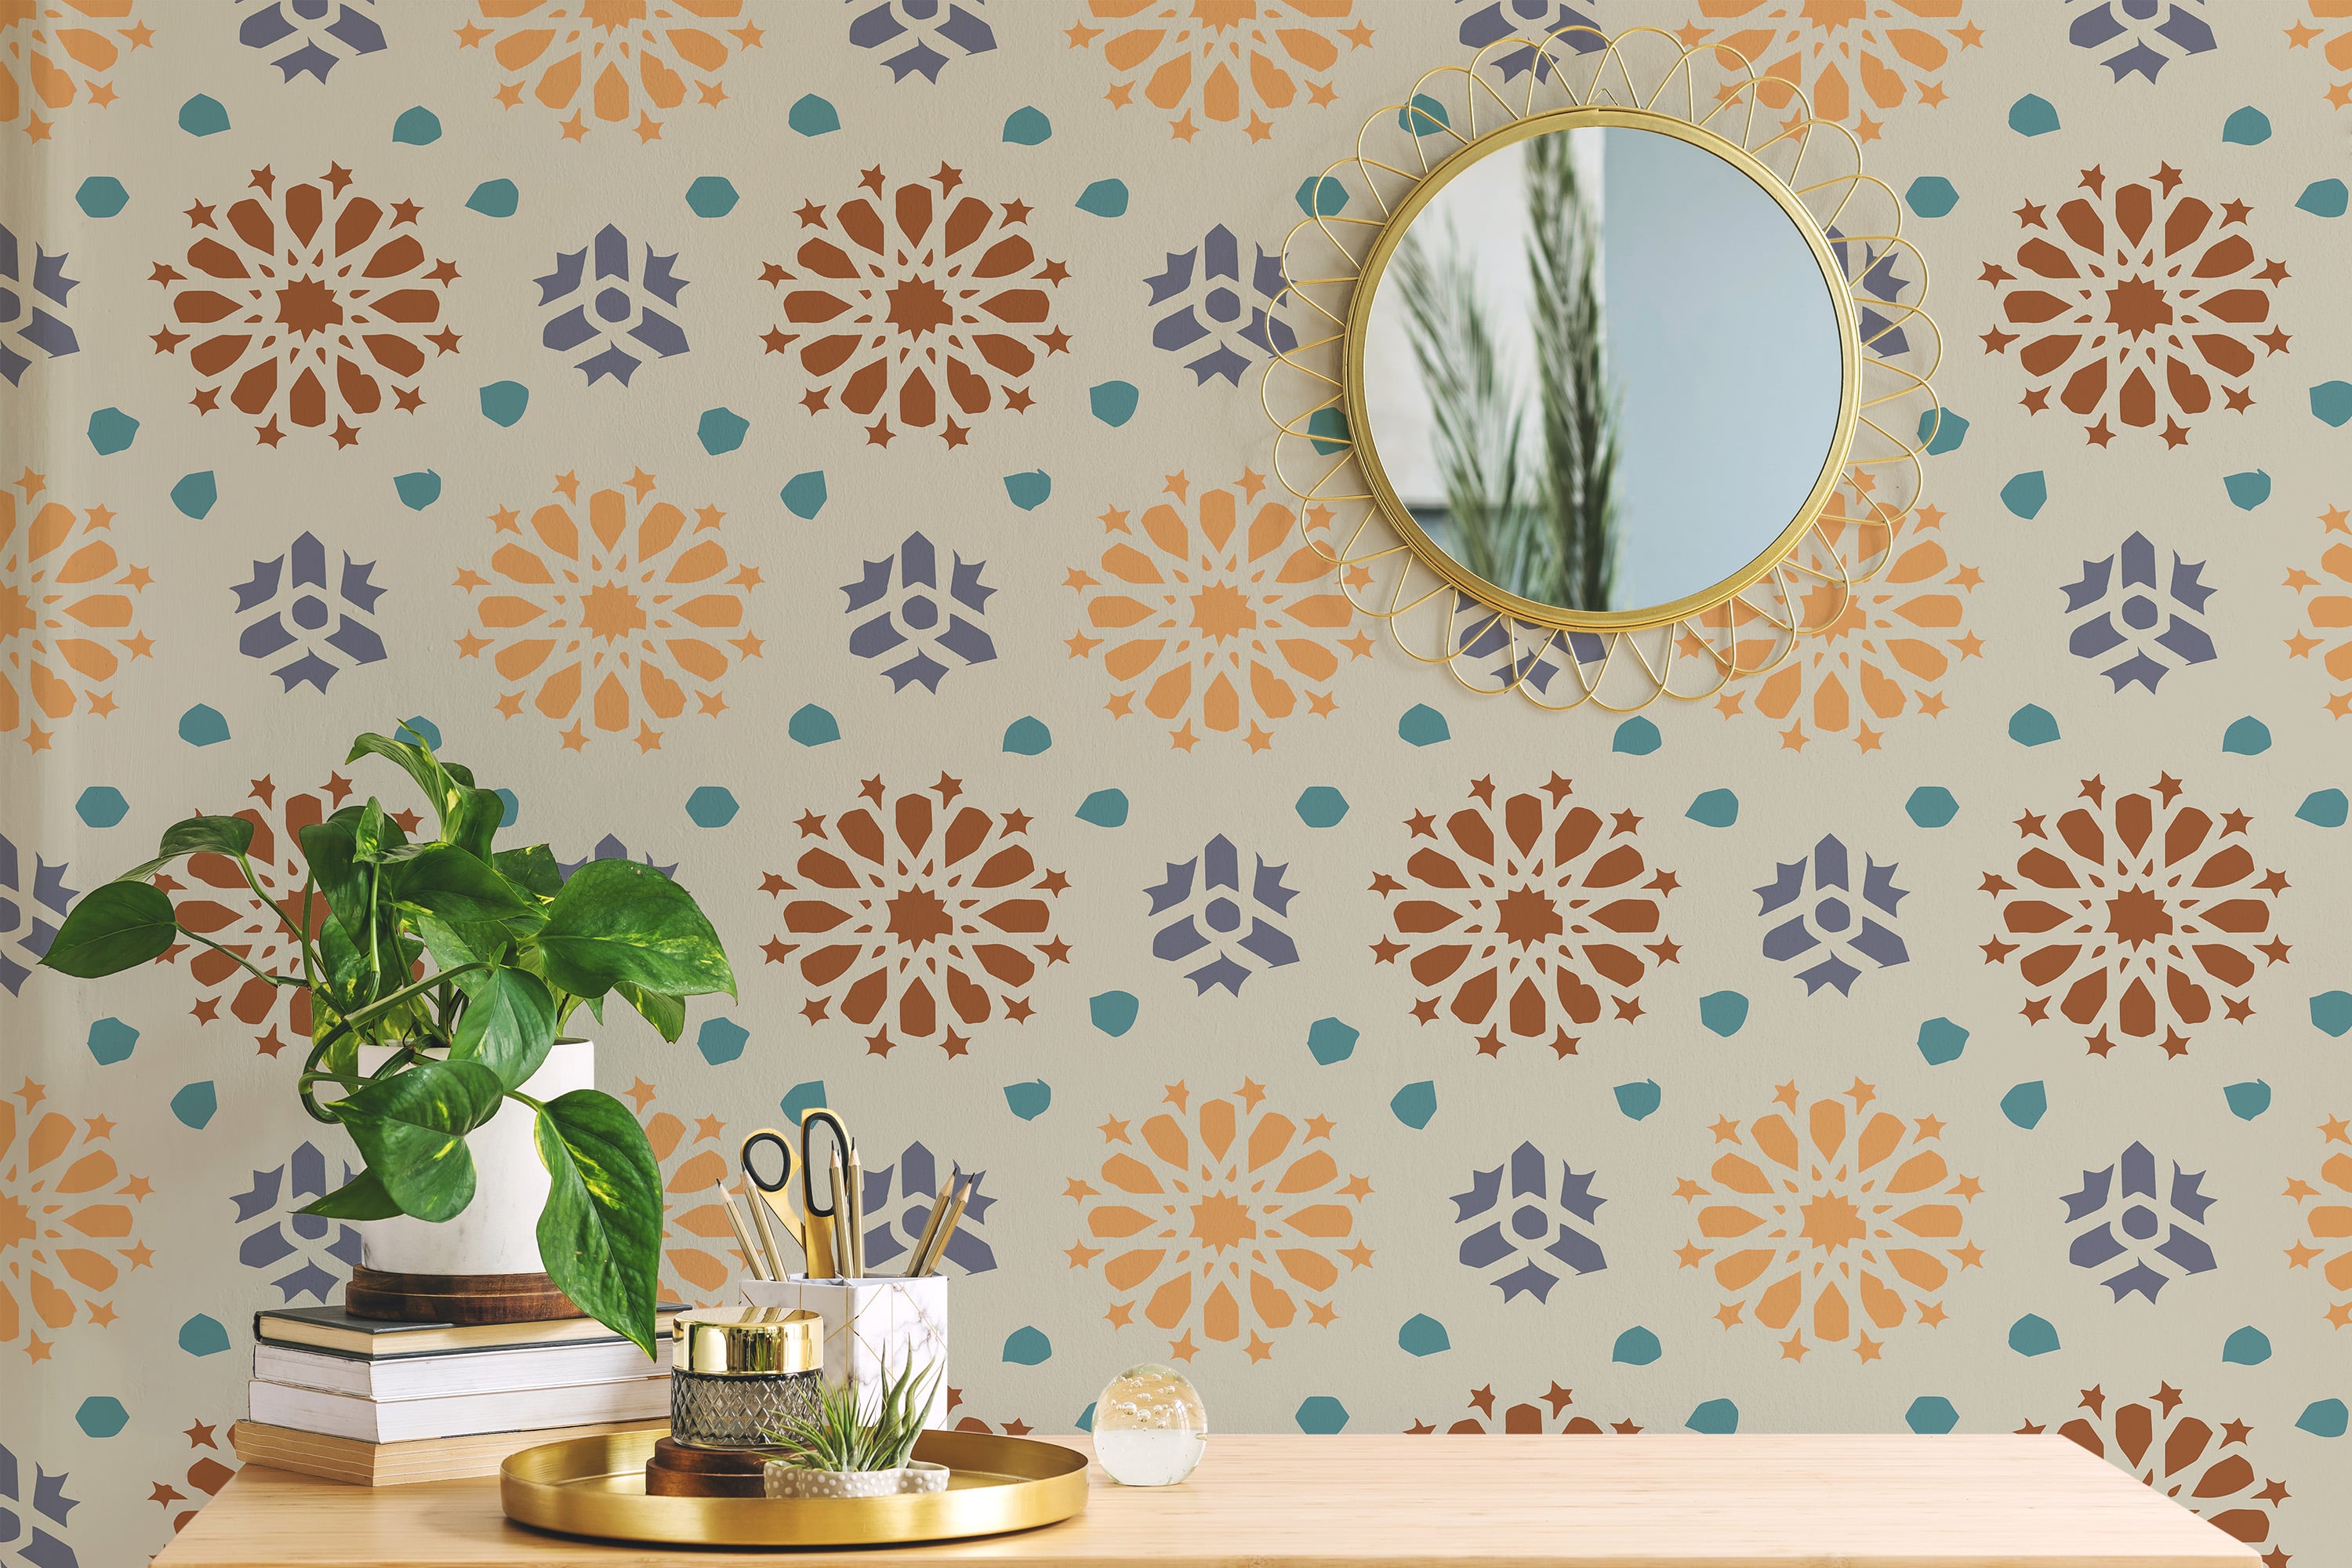 Moroccan floral wallpaper - Peel and Stick or Traditional